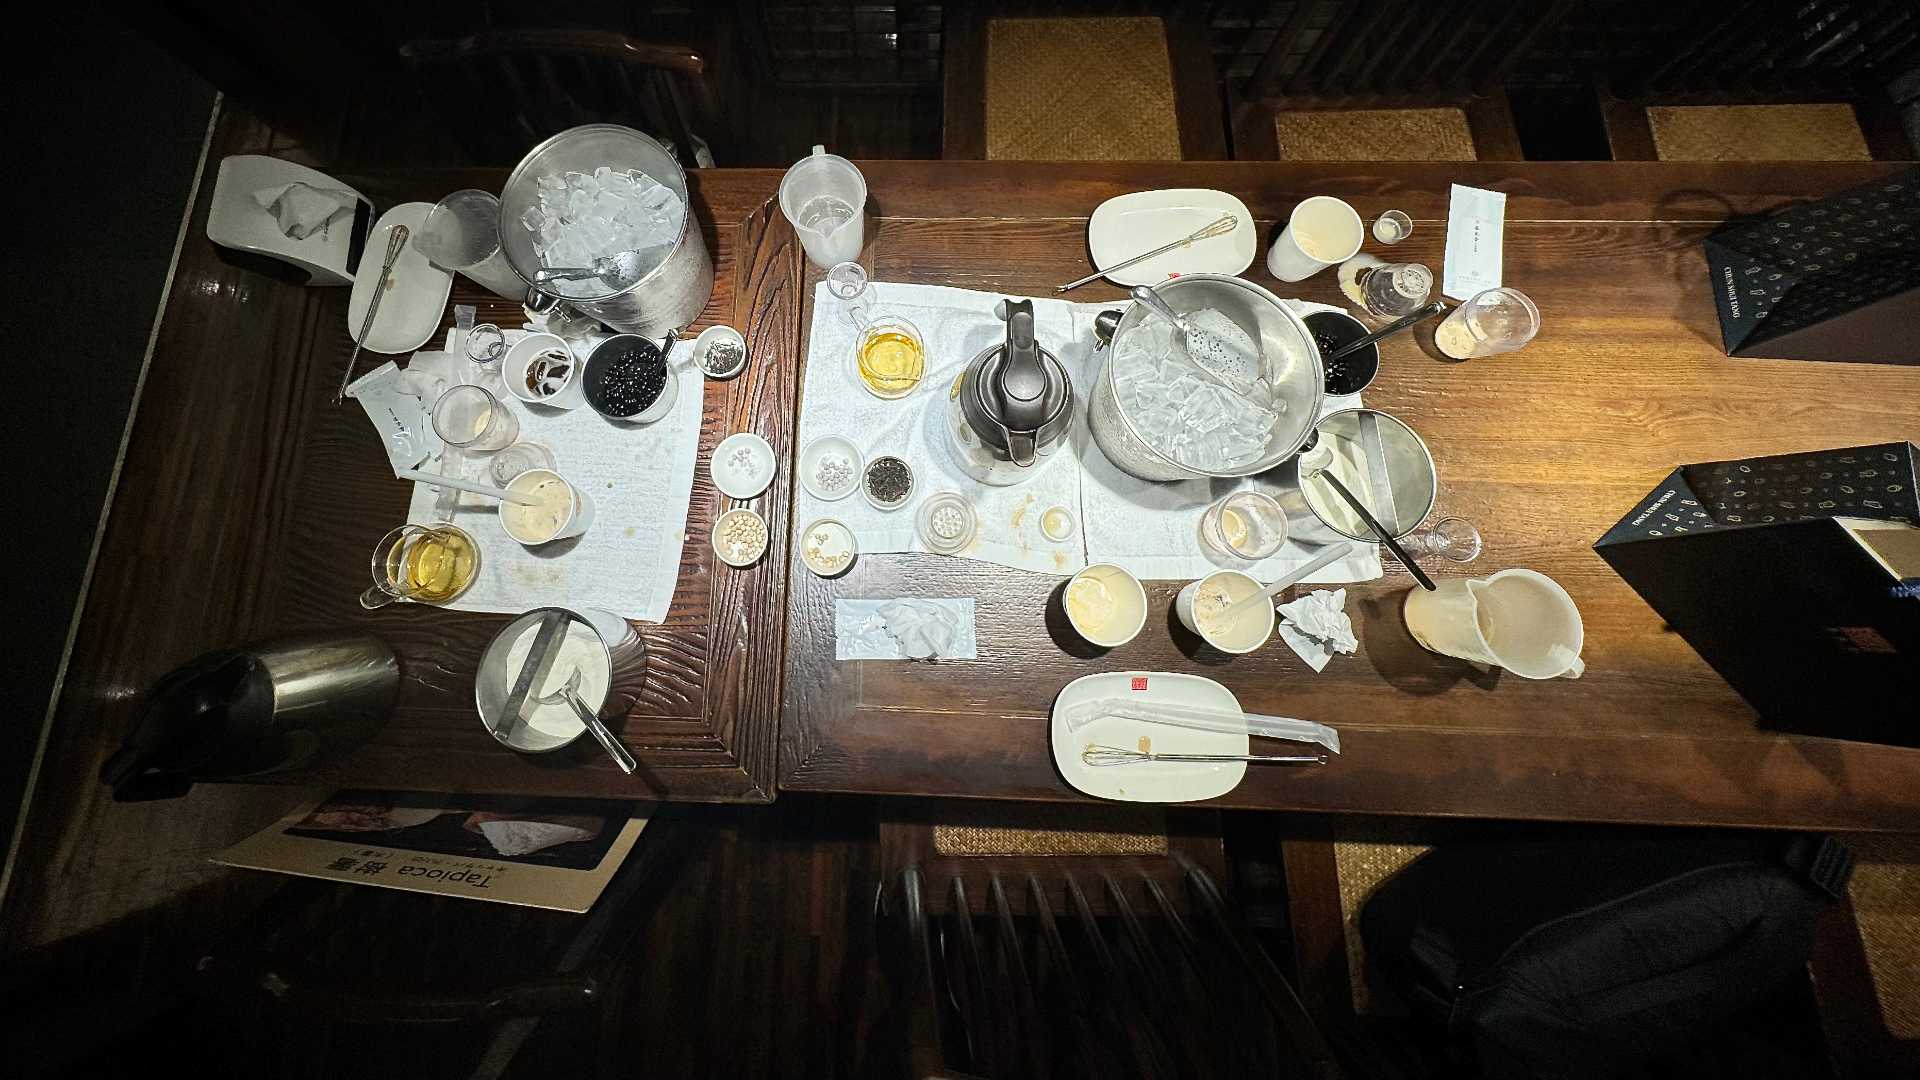 A messy tabletop covered in paper cups, kitchen utensils, and bubble tea ingredients.